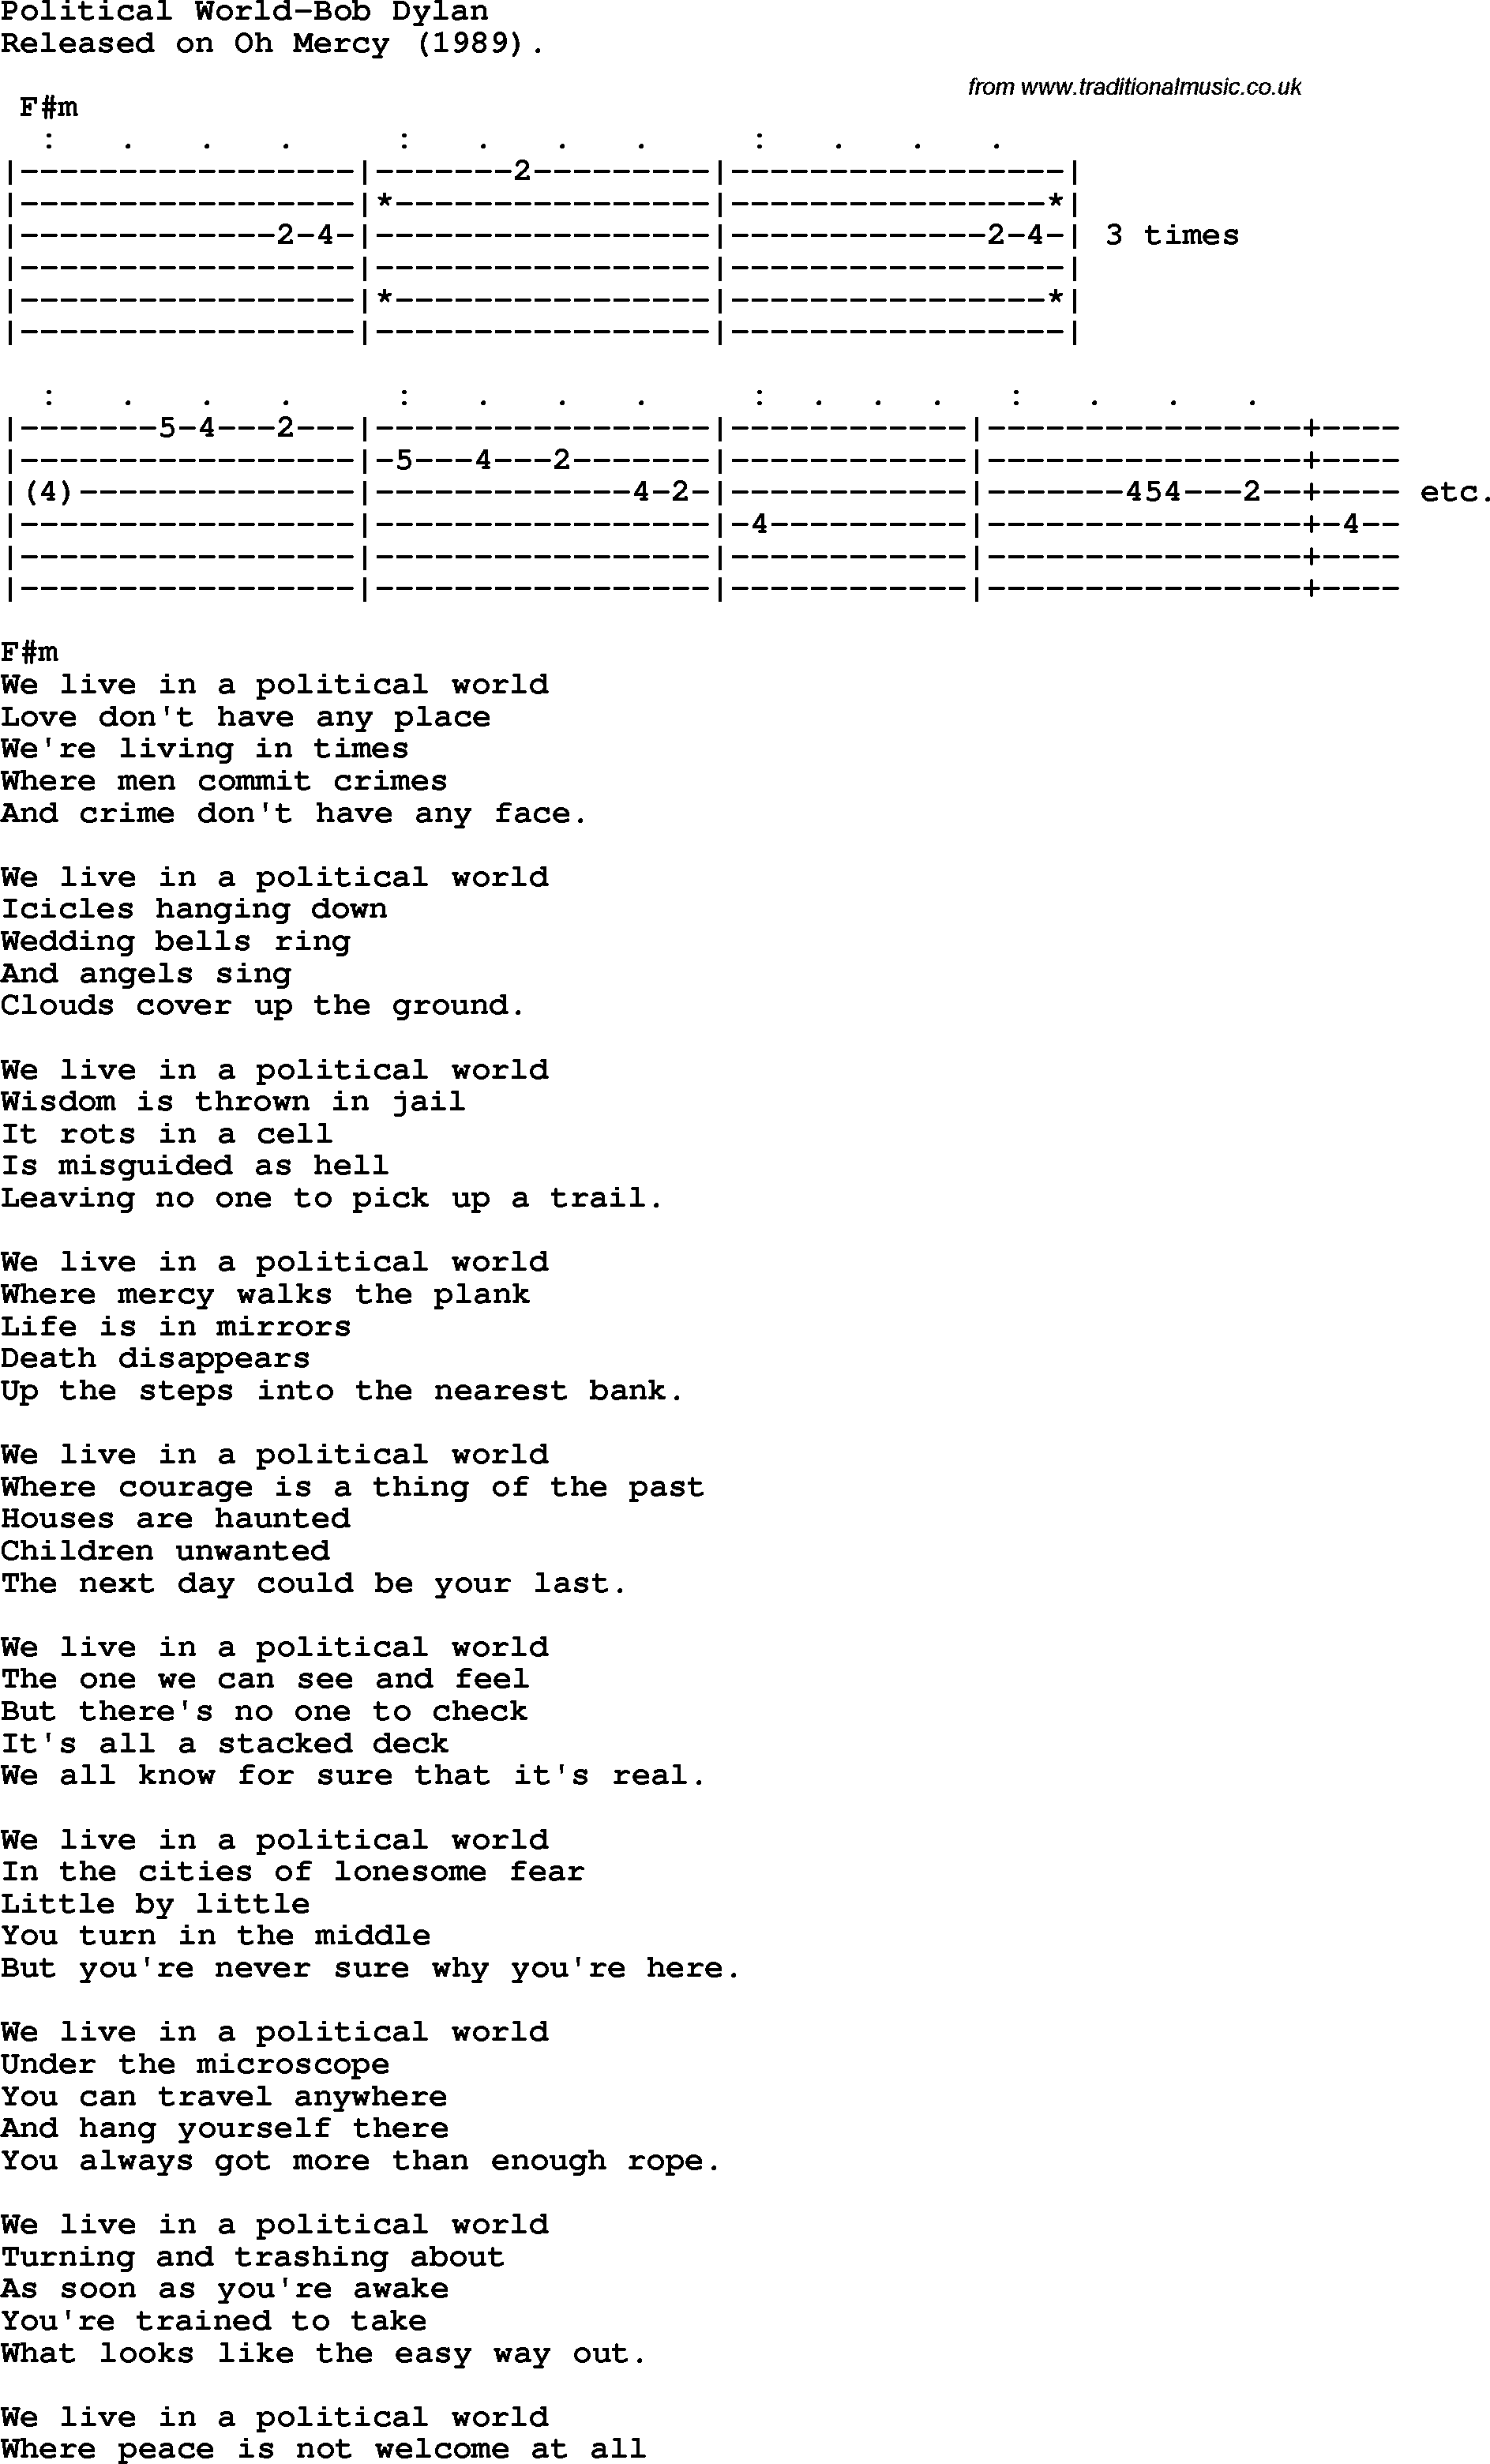 Protest Song Political World-Bob Dylan lyrics and chords